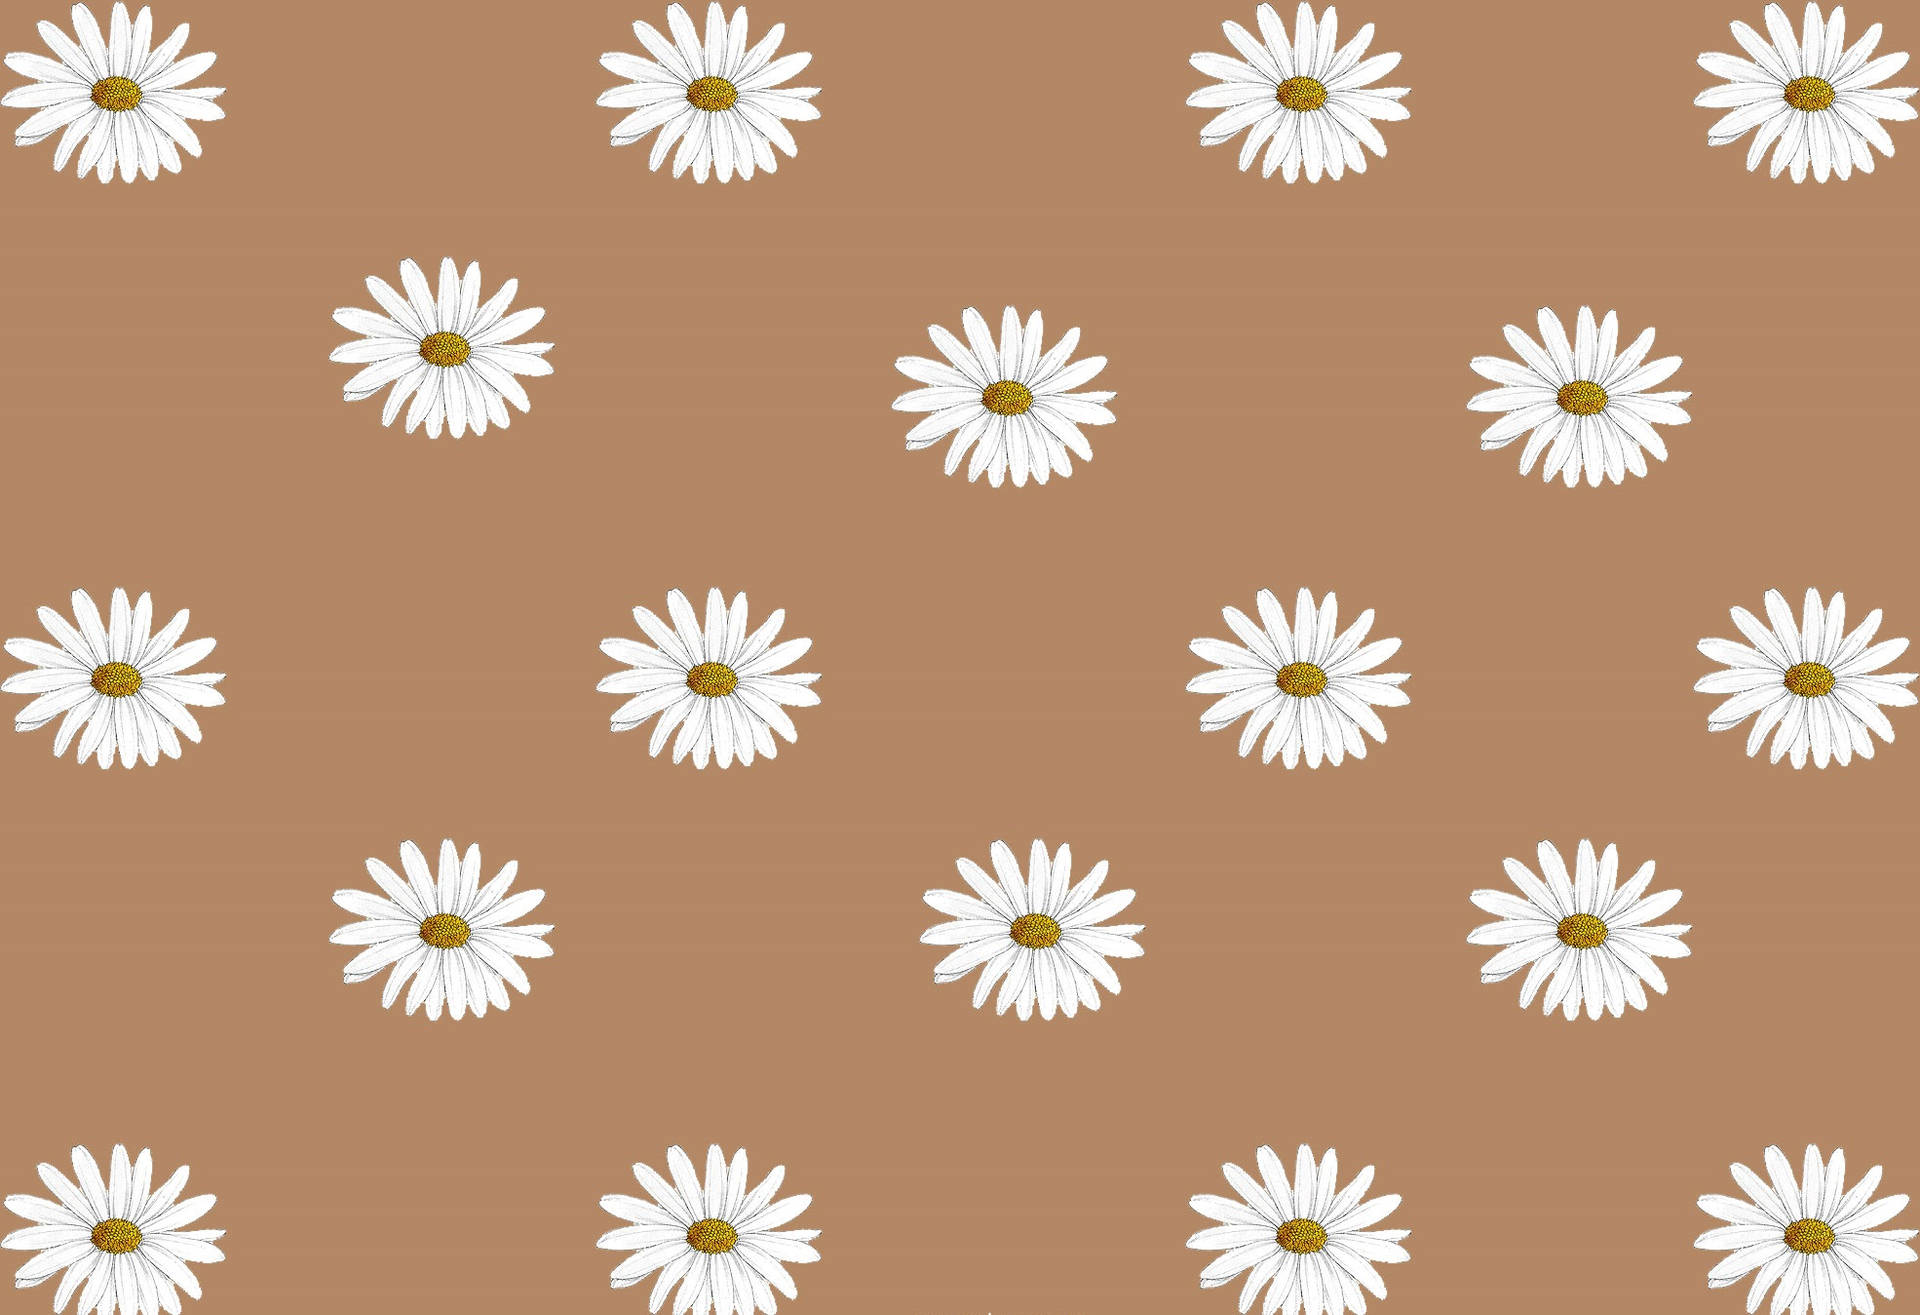 Floral Beige Brown Aesthetic Background